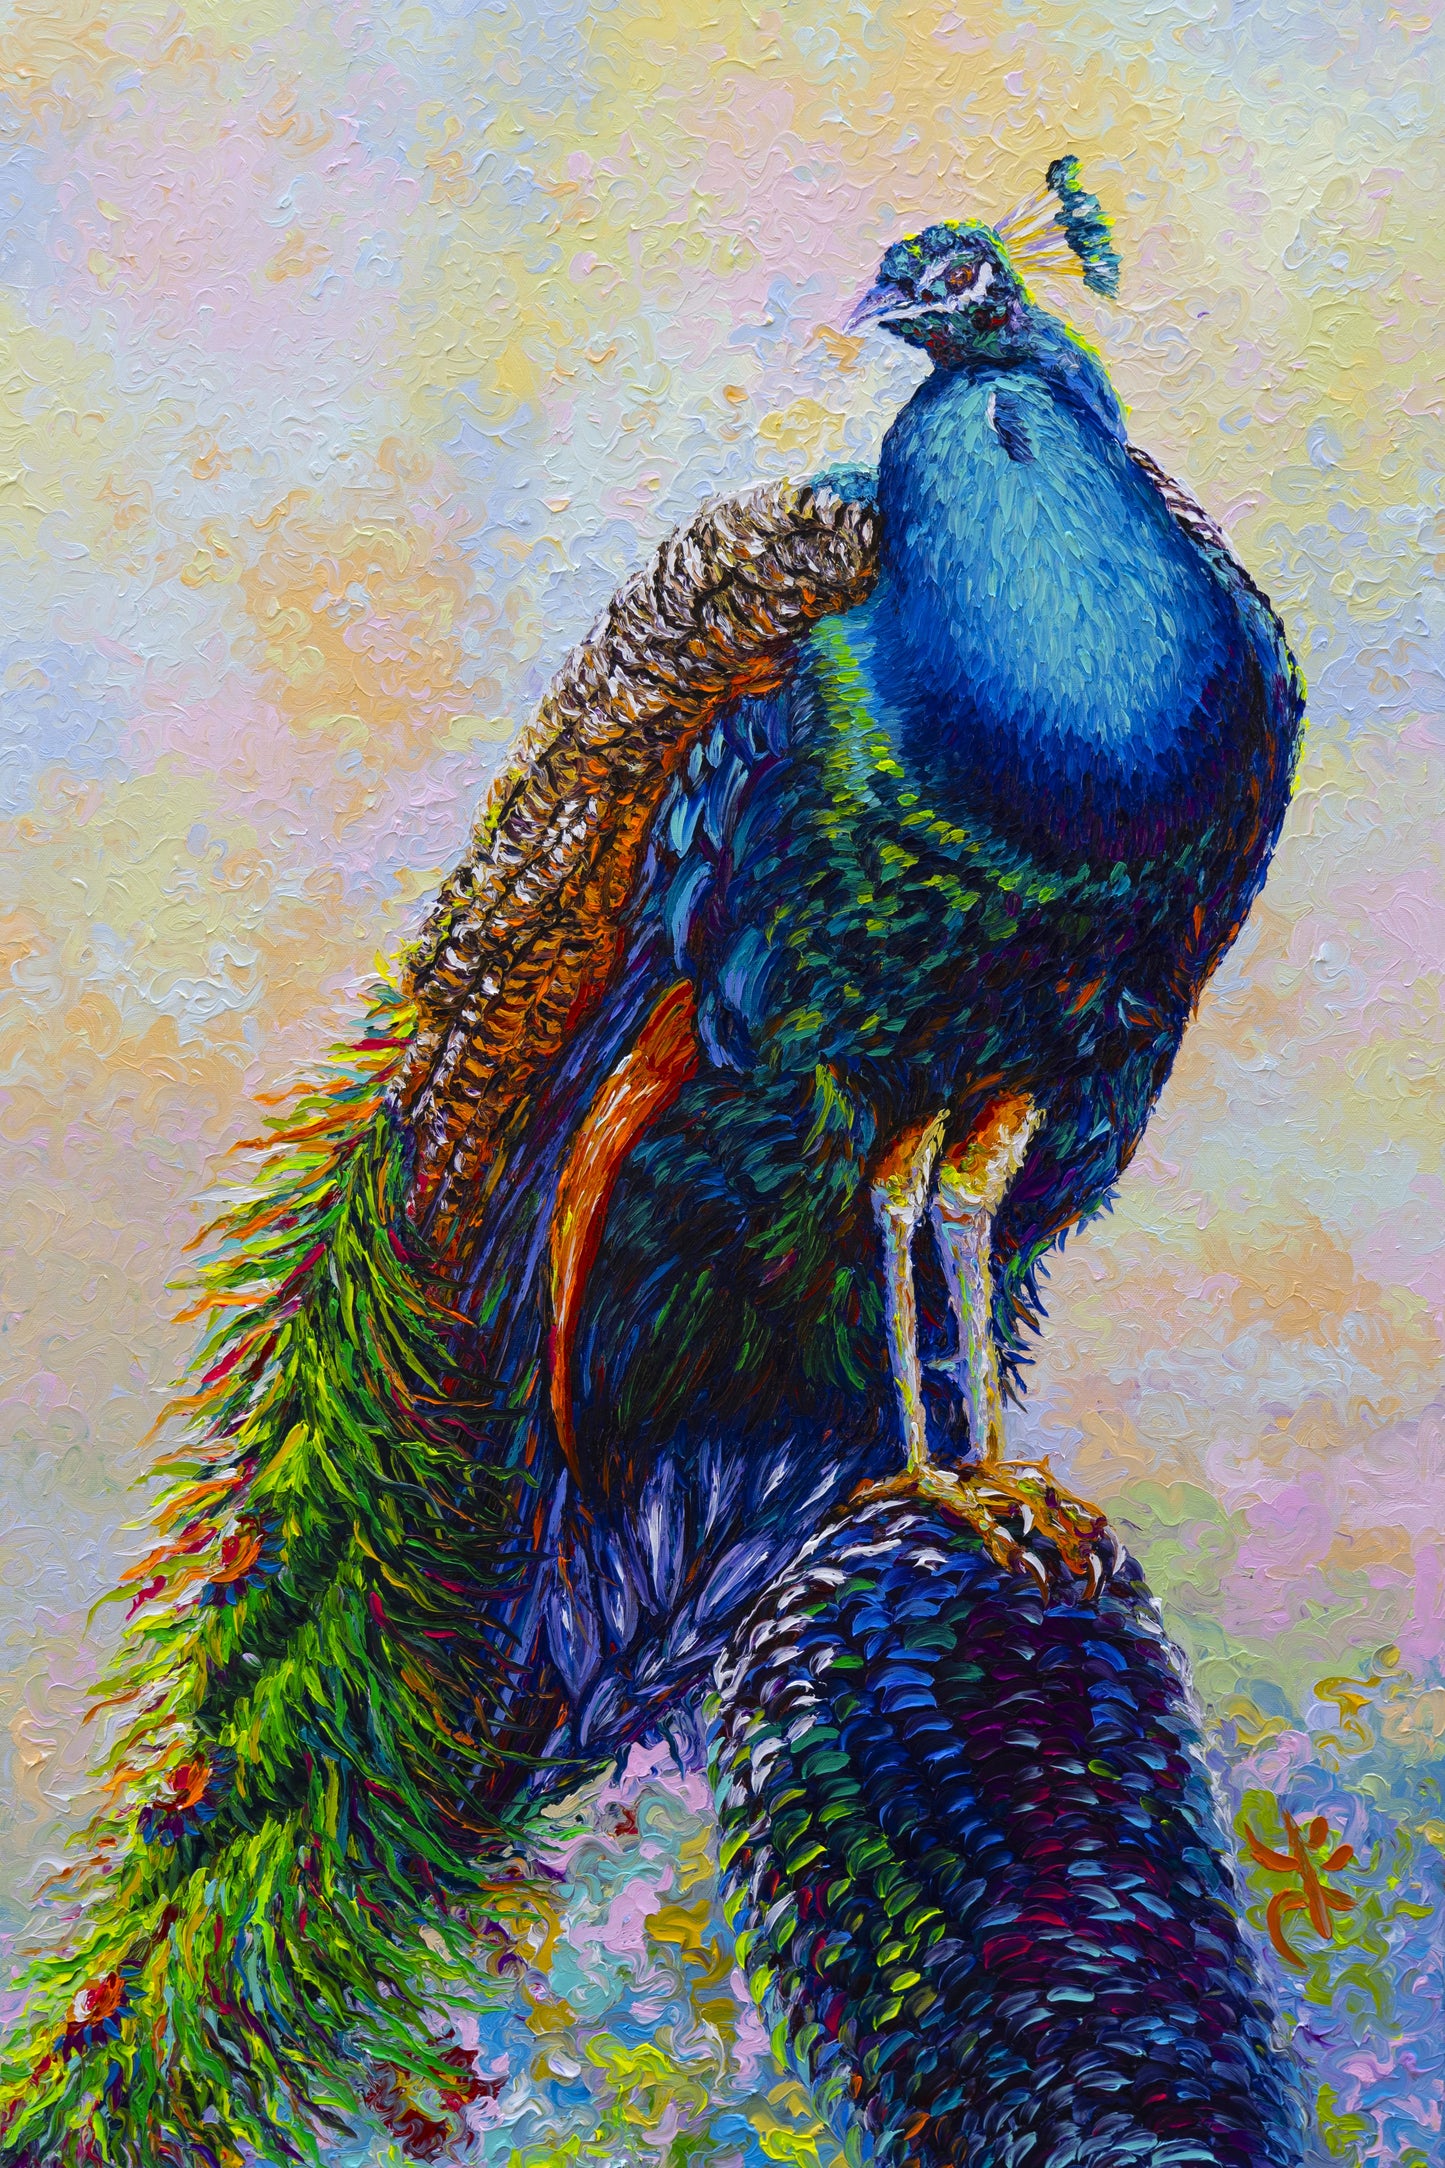 "The Beauty on the rock” Peacock on the rock- Original Oil Finger Painting